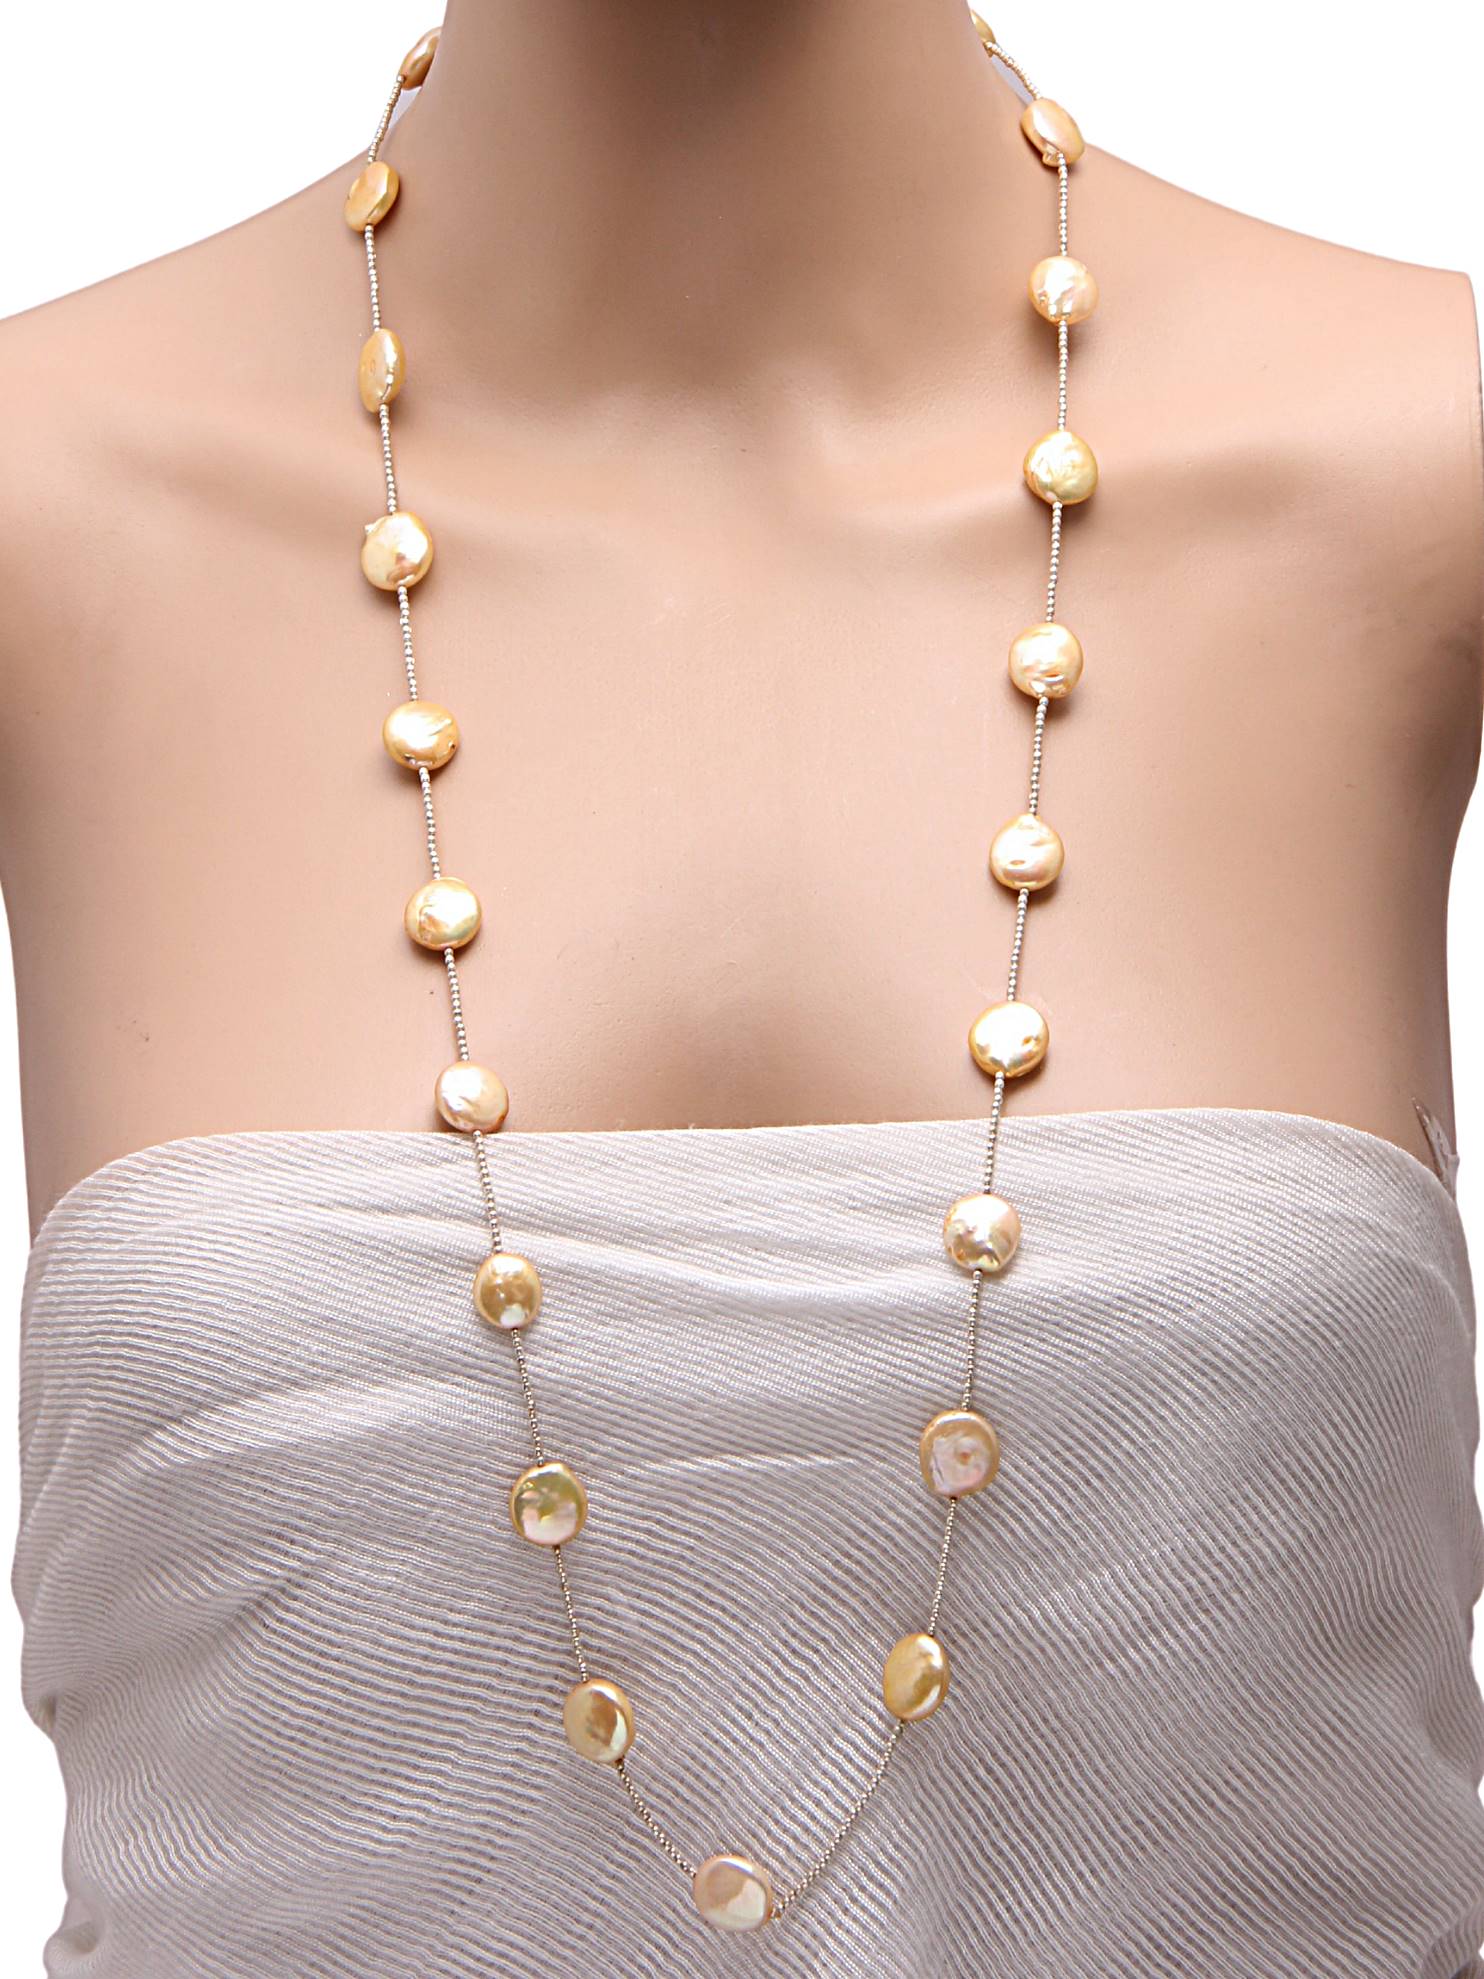 Baroque Flat Rounded Light Golden Pearls with Silver 1MM Bead Balls Long Chain - (F1019)